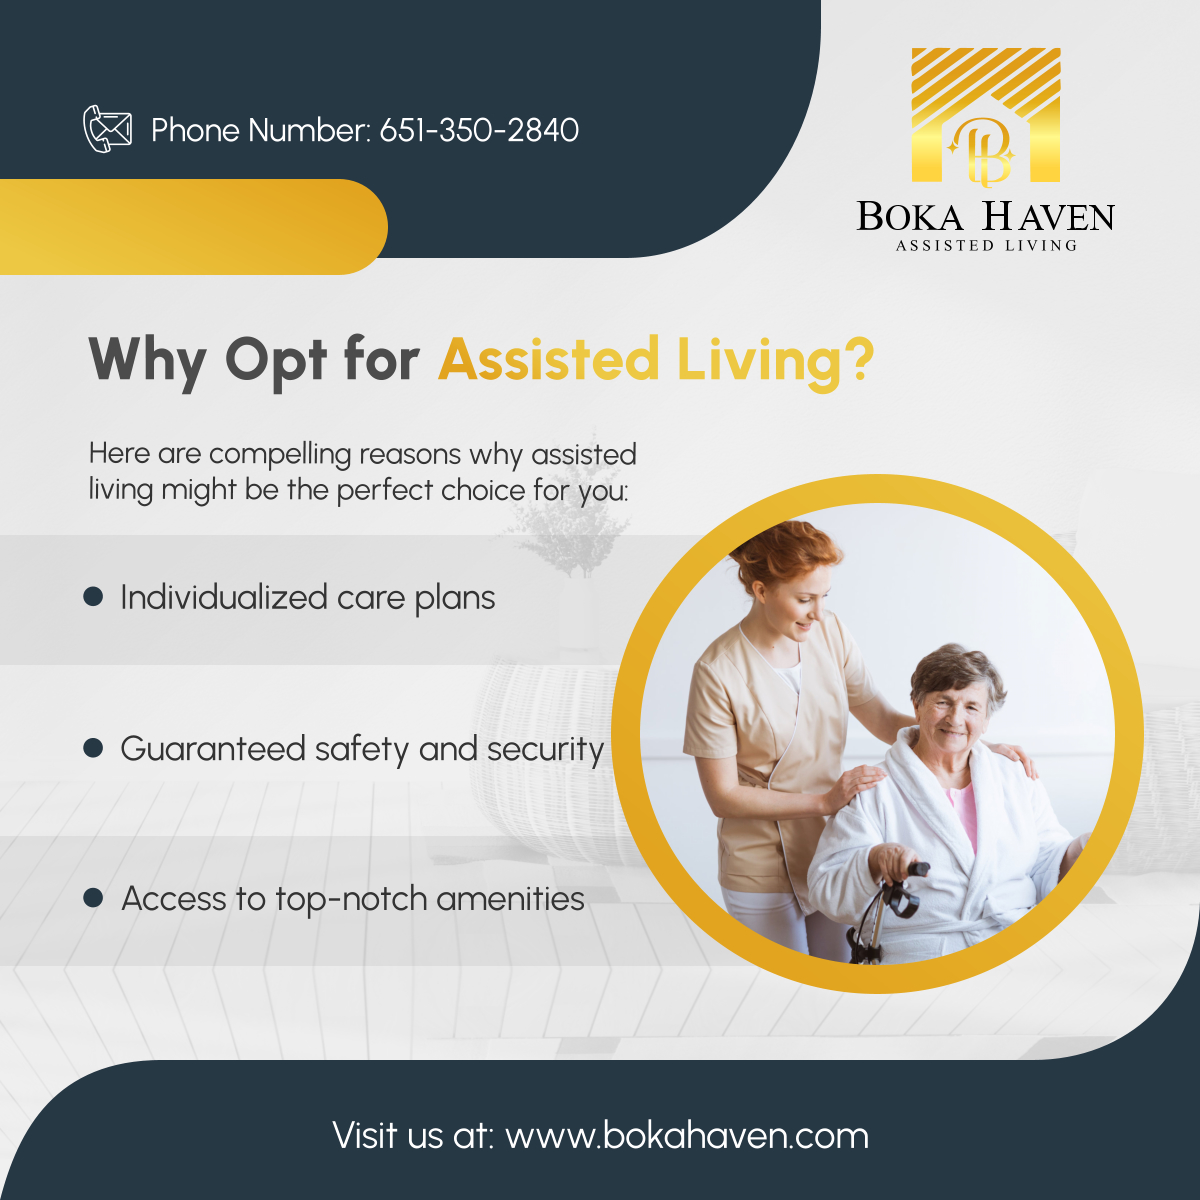 By opting for assisted living, seniors and their families can enjoy peace of mind knowing that their needs are met in a nurturing and vibrant community environment.

#NorthBranchMN #AssistedLiving #WhyChooseAssistedLiving